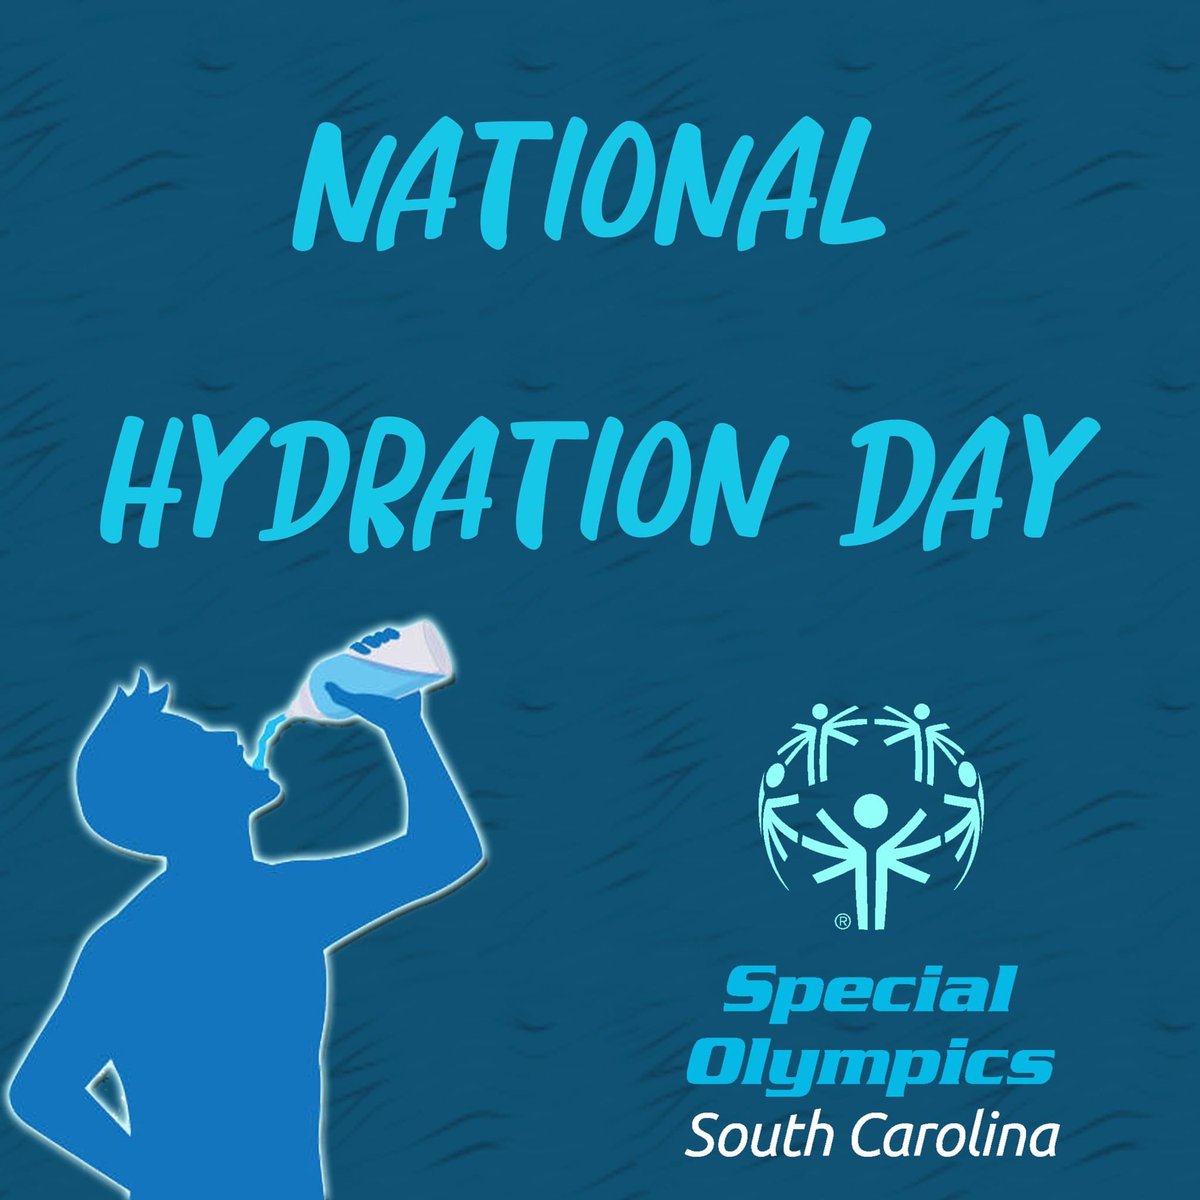 Beat the summer heat by making sure you hydrate today on #NationalHydrationDay and every other day of summer!